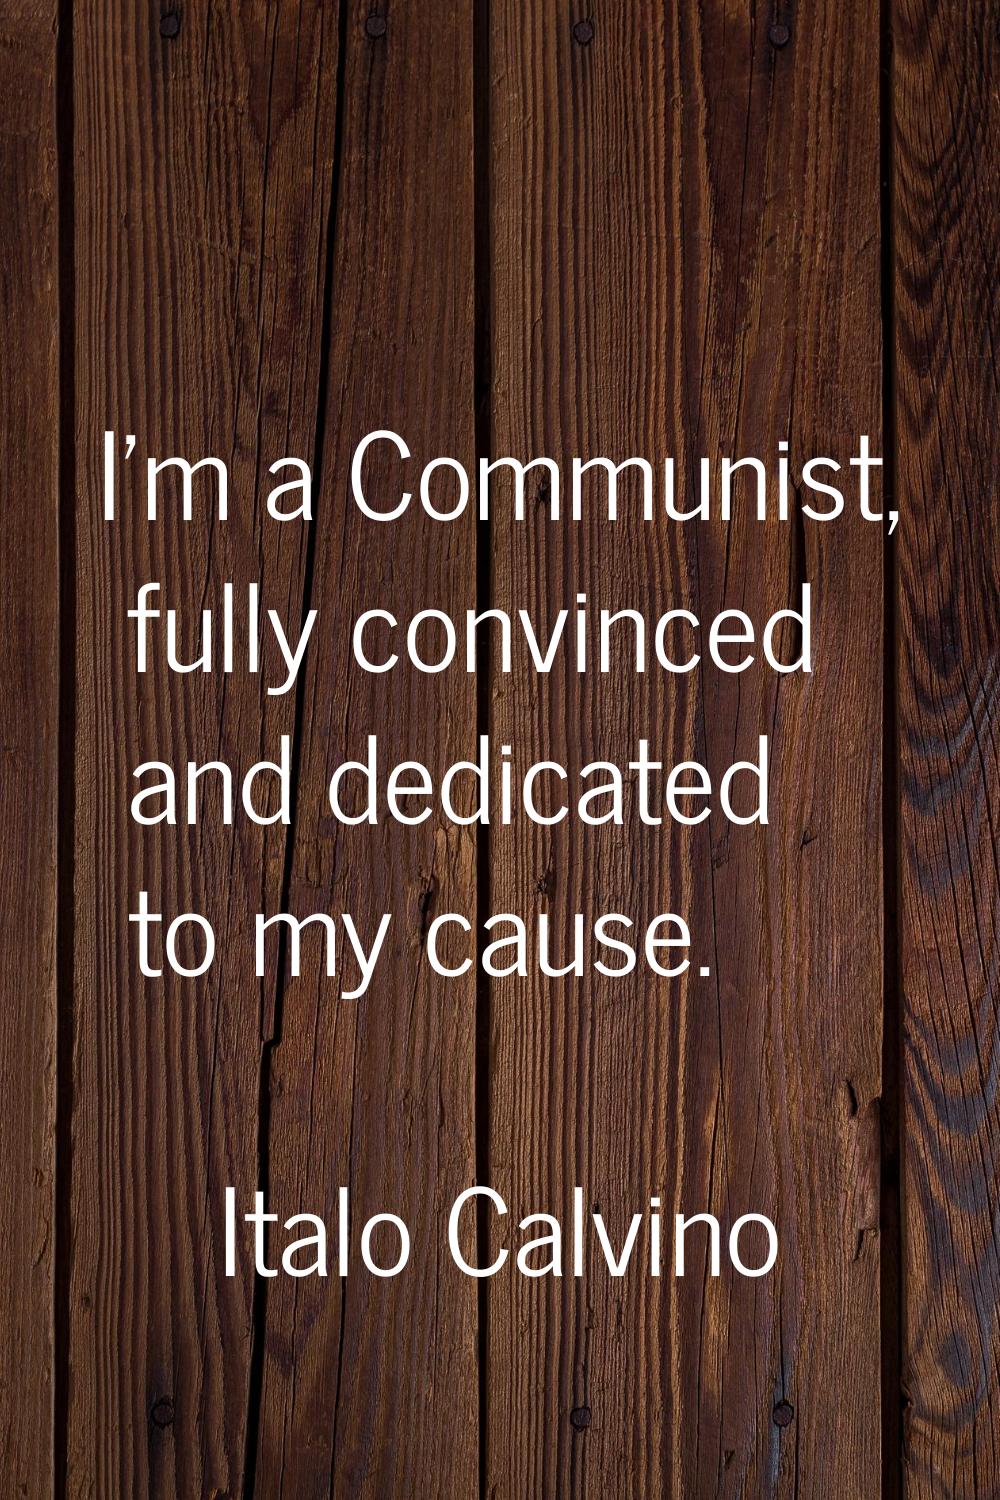 I'm a Communist, fully convinced and dedicated to my cause.